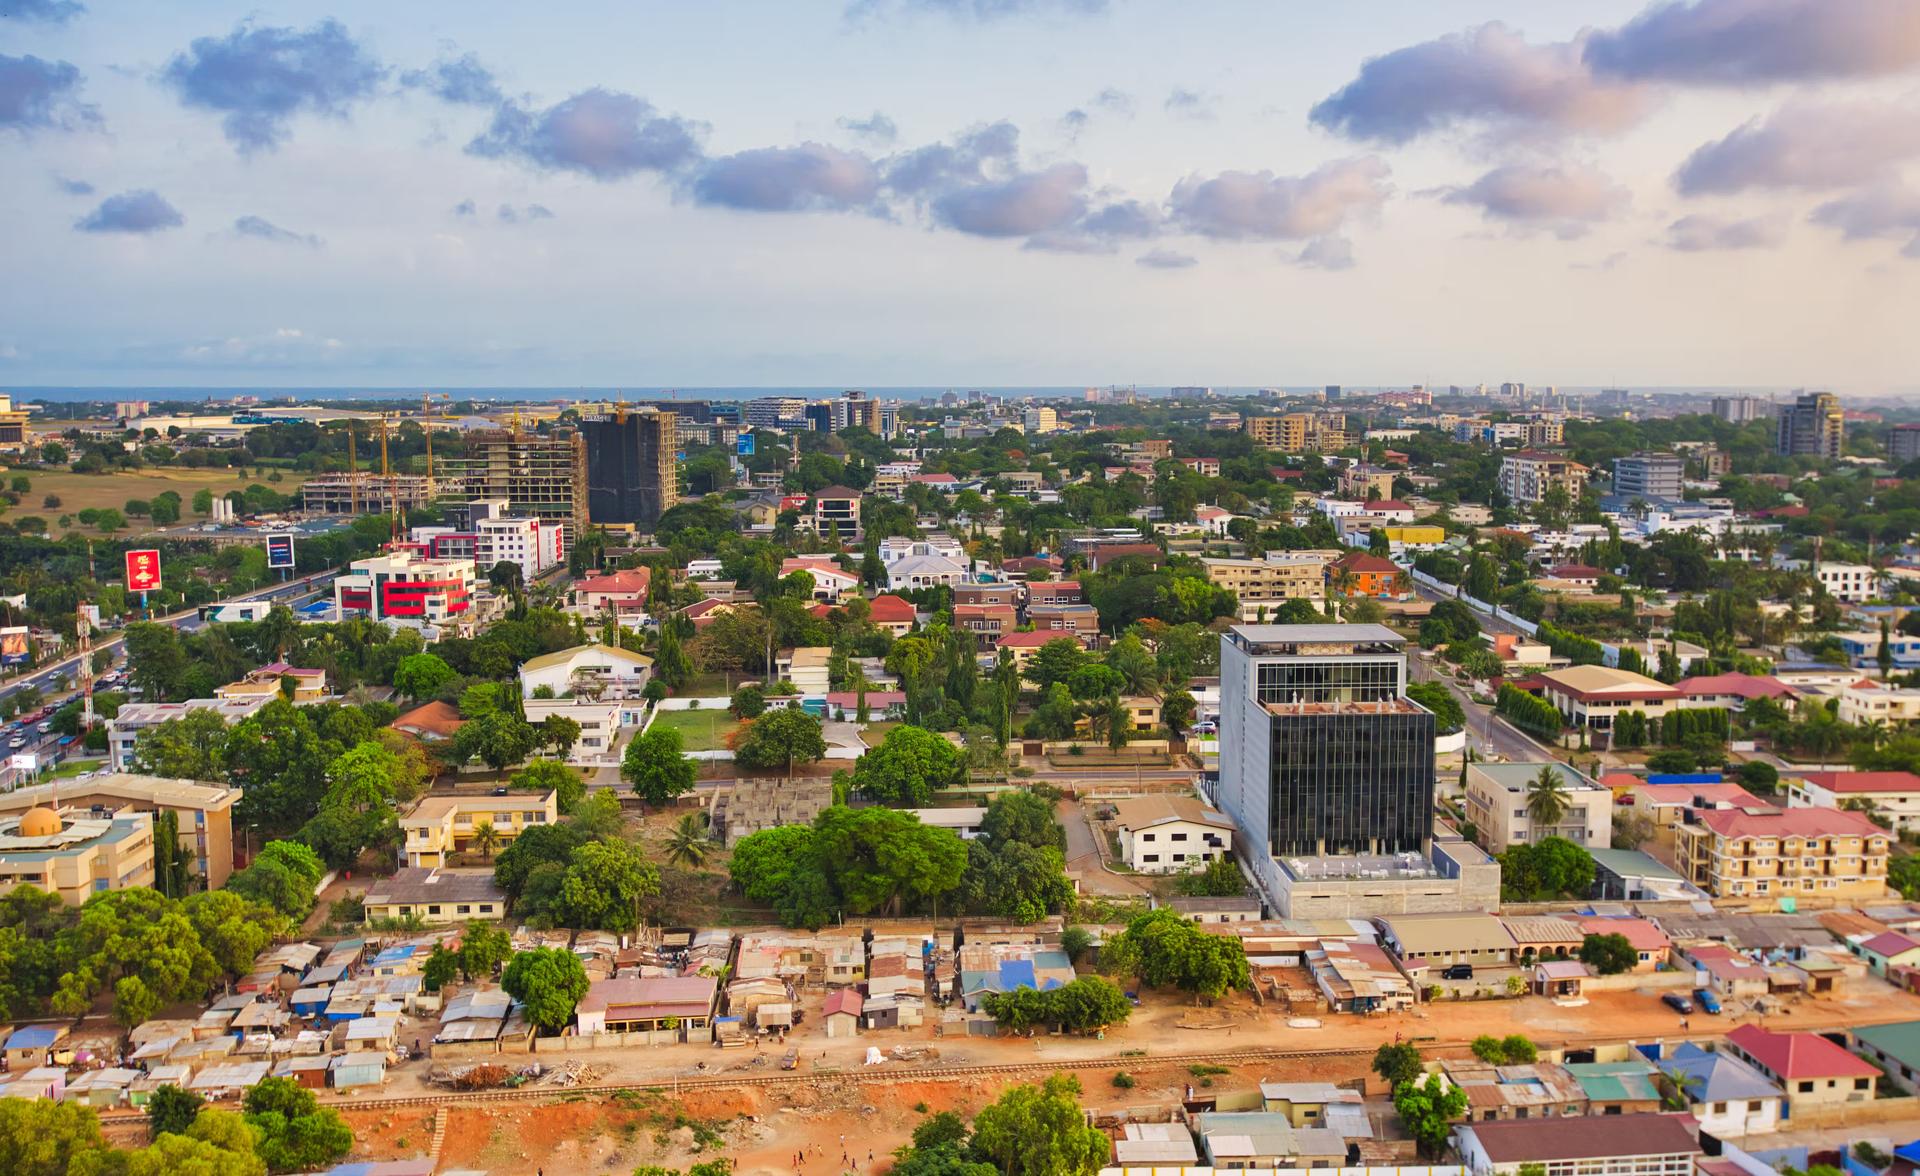 The skyline of Accra, Ghana during the day. 